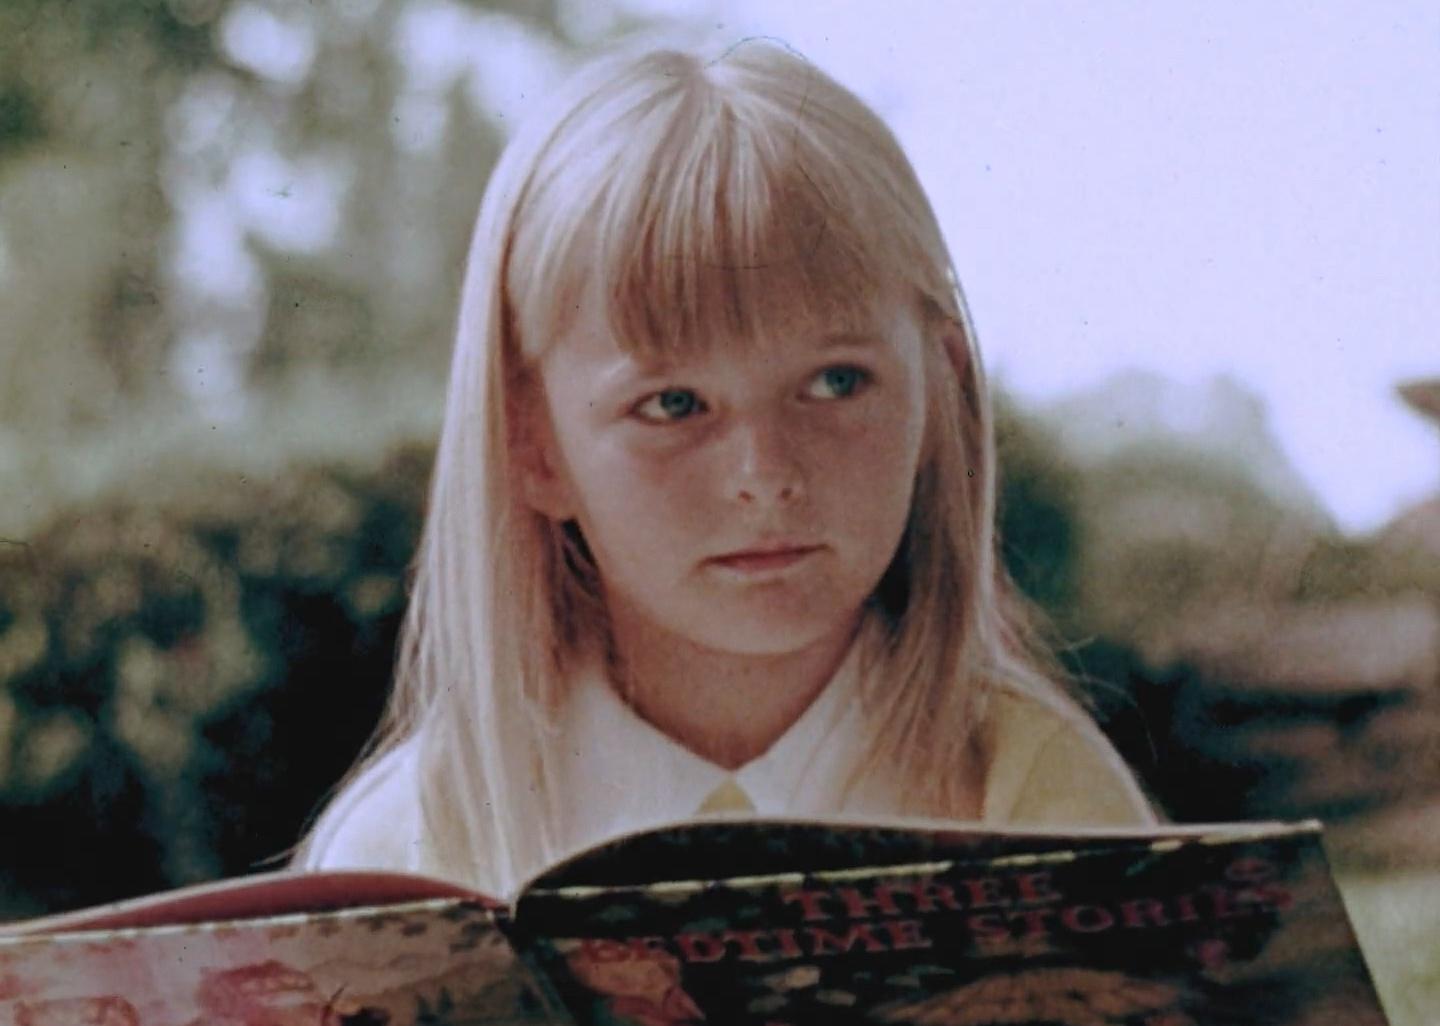 A little blonde girl holding a book of bedtime stories.